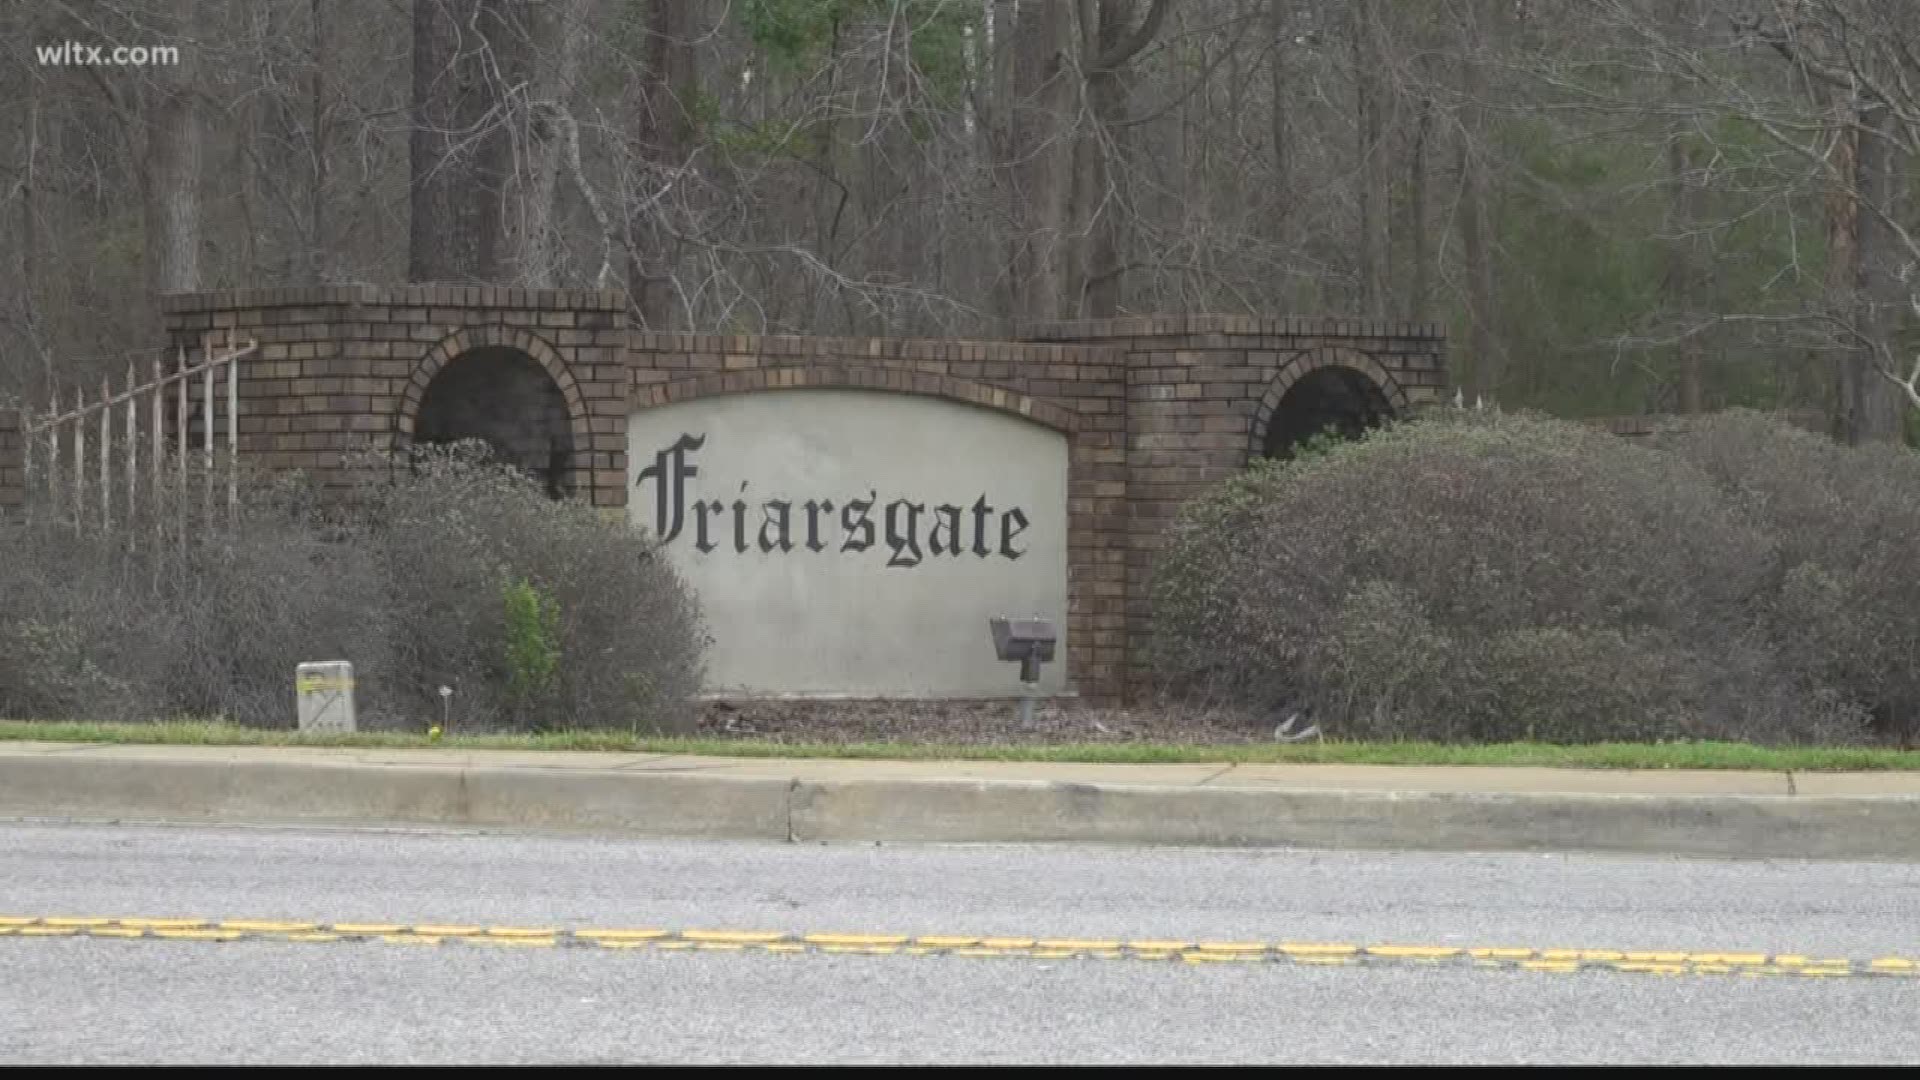 The neighborhood entrance off of Broad River Road there is a "Friarsgate" sign that has been there for decades and needs a little TLC according to some town members